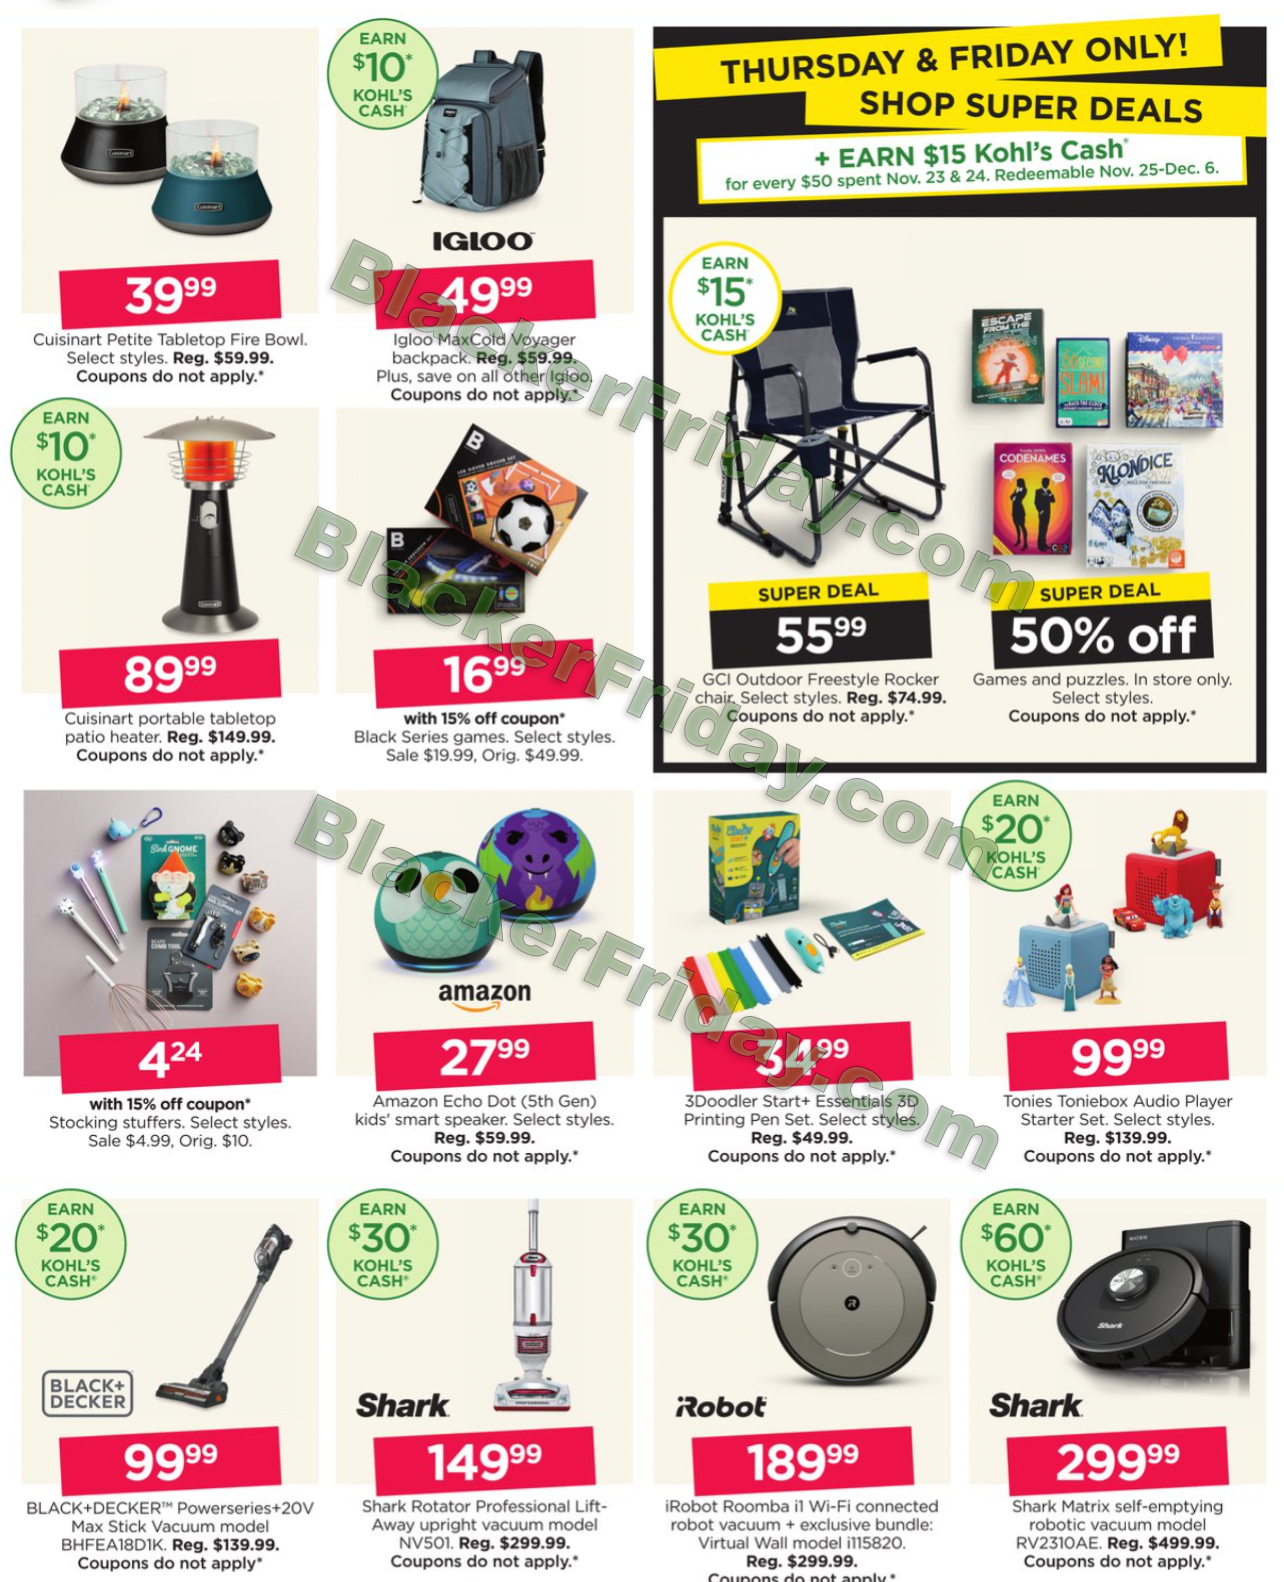 Kohl's Black Friday 2016 Doorbuster ad circular released (see all 64 pages)